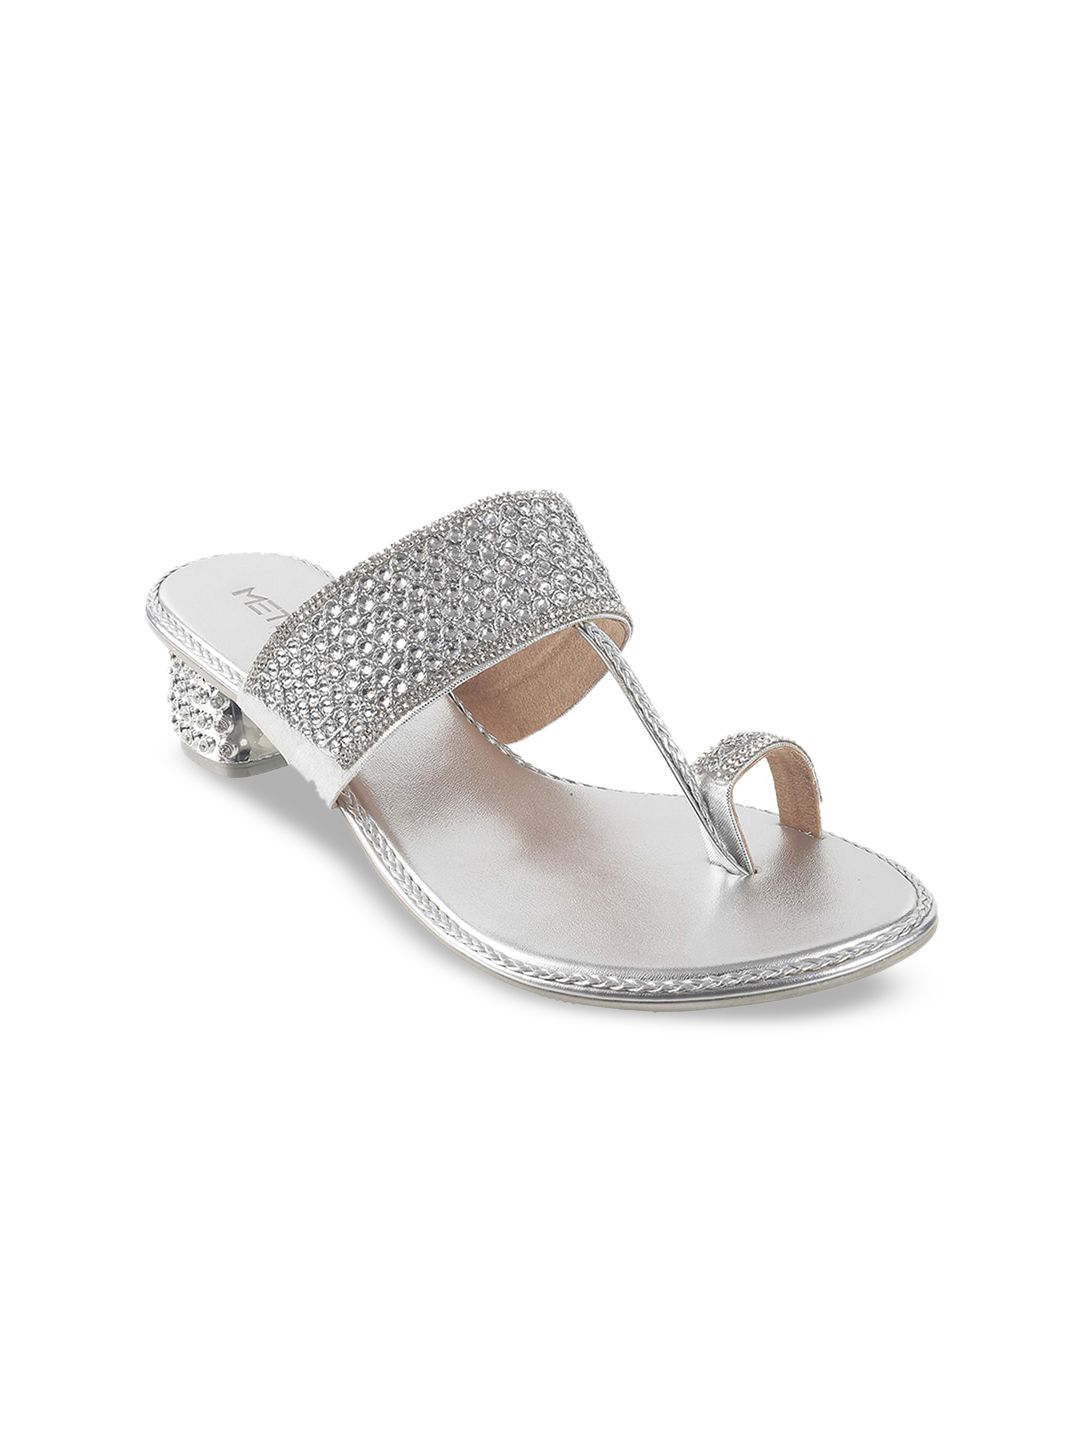 Metro Women Silver-Toned Embellished Sandals Price in India